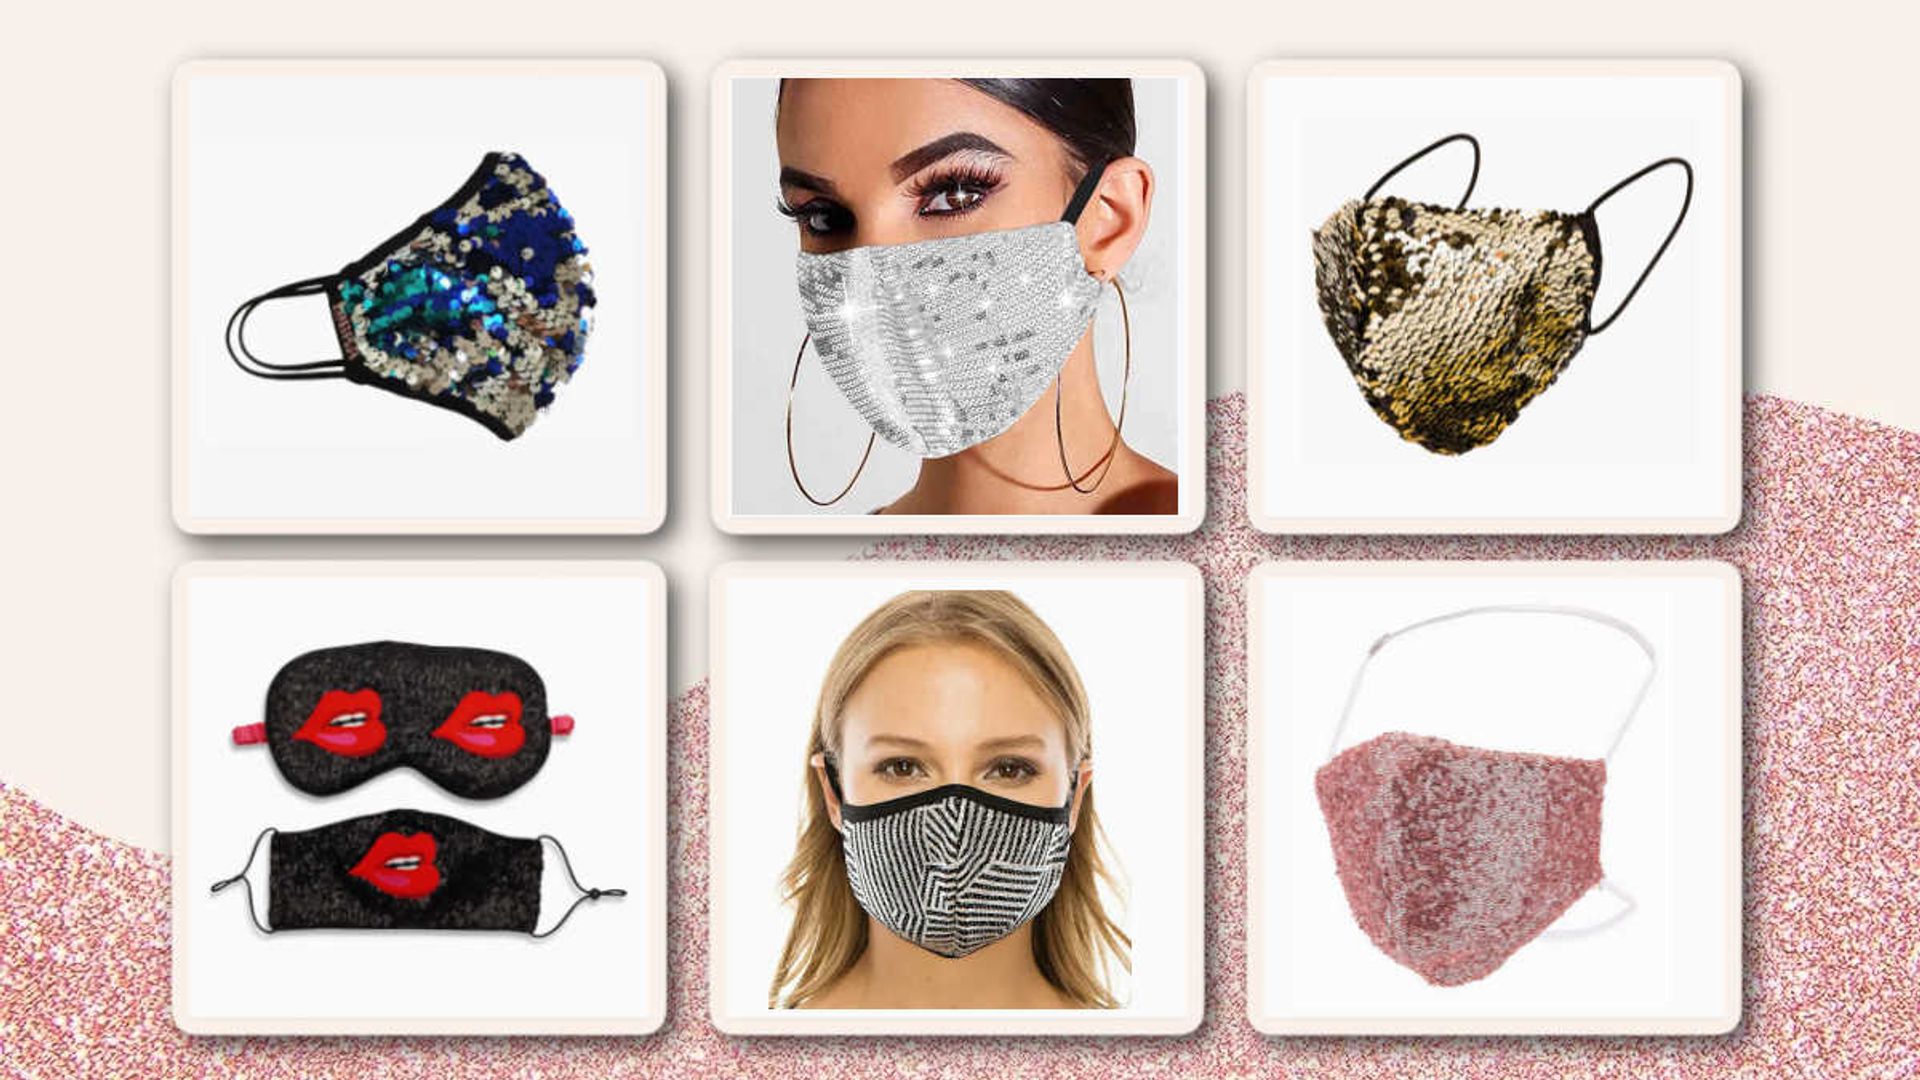 16 sparkly face masks to wear if you want some glam with your face covering